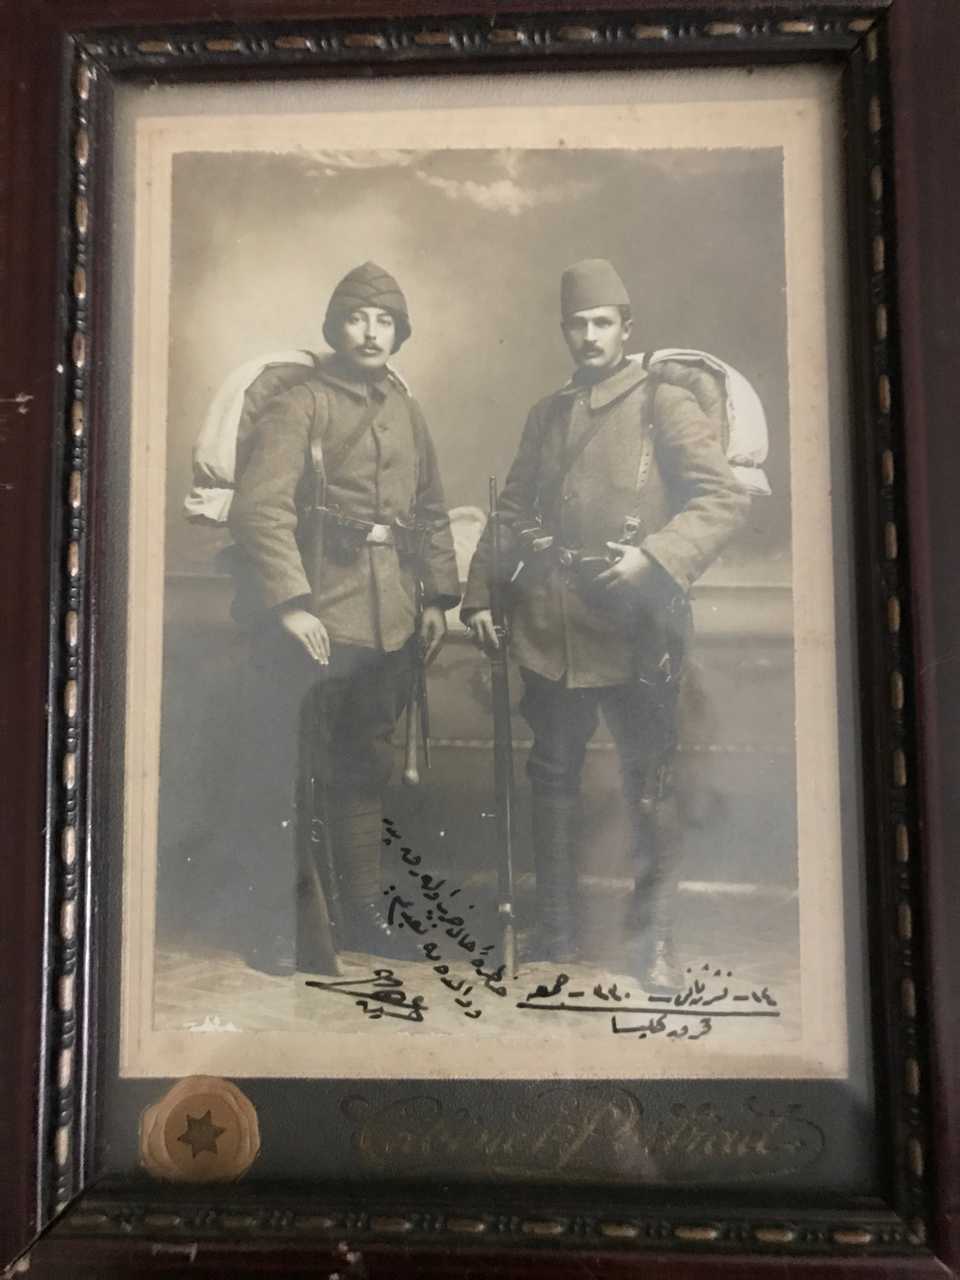 A portrait of Huseyin Atıf Bese and his friend taken during their military deployment in World War I.